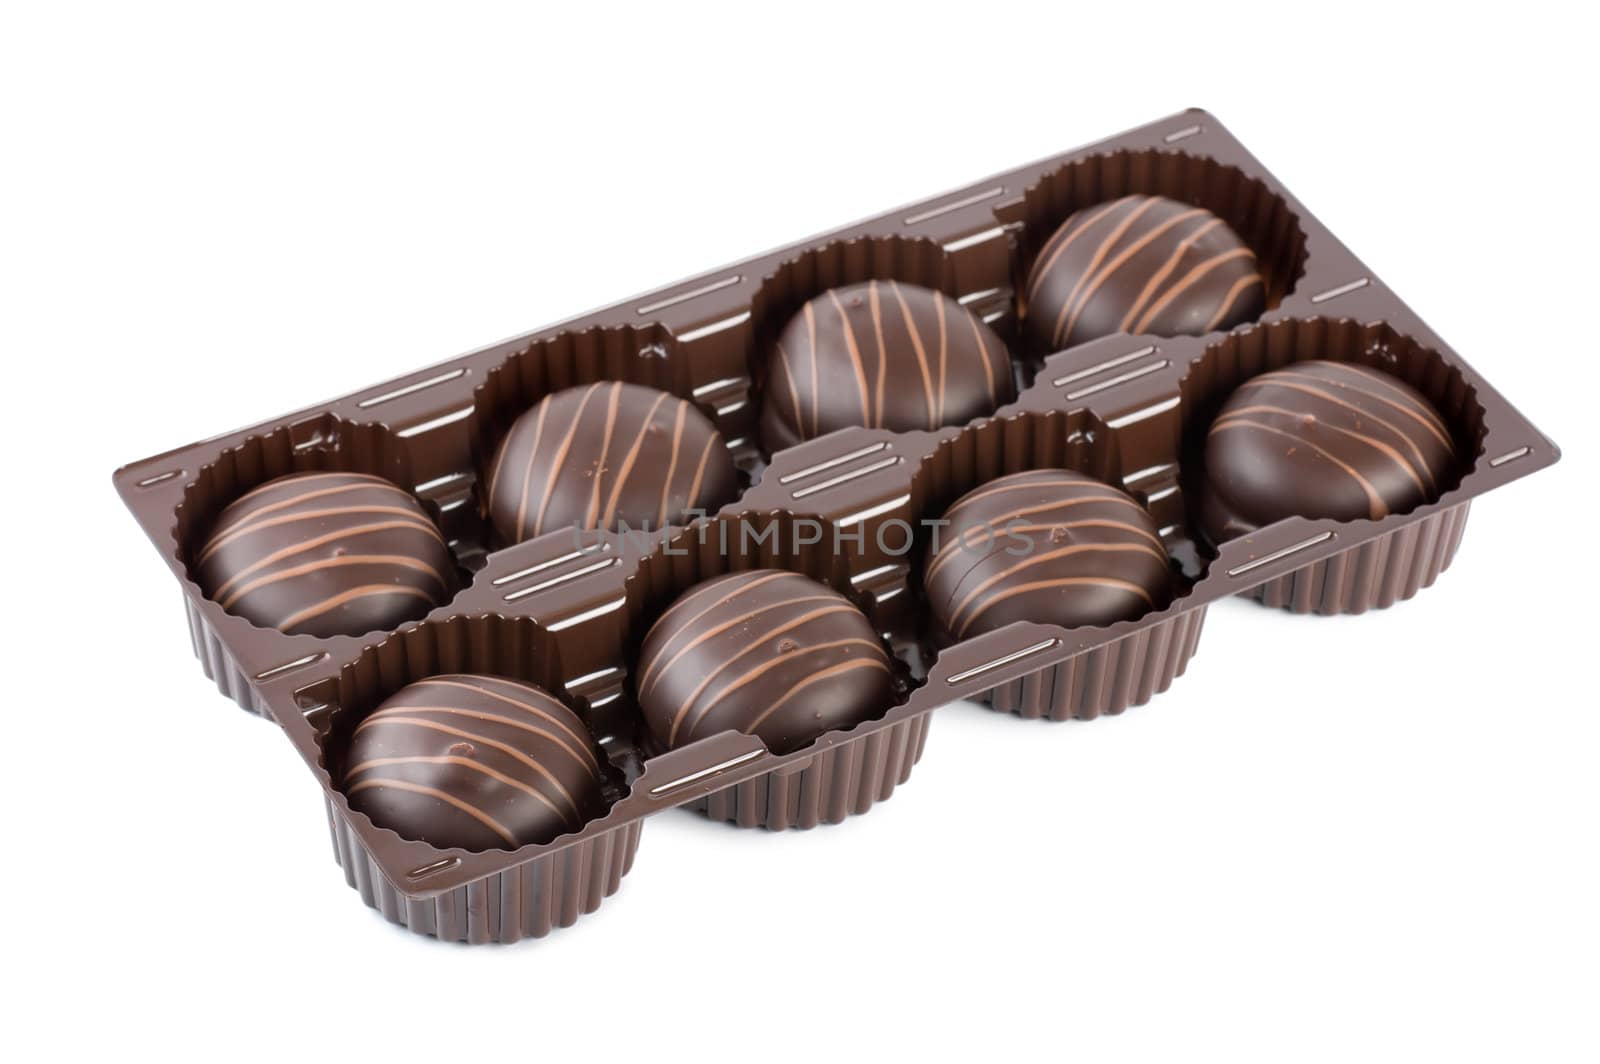 Chocolate cookies in package isolated on white background